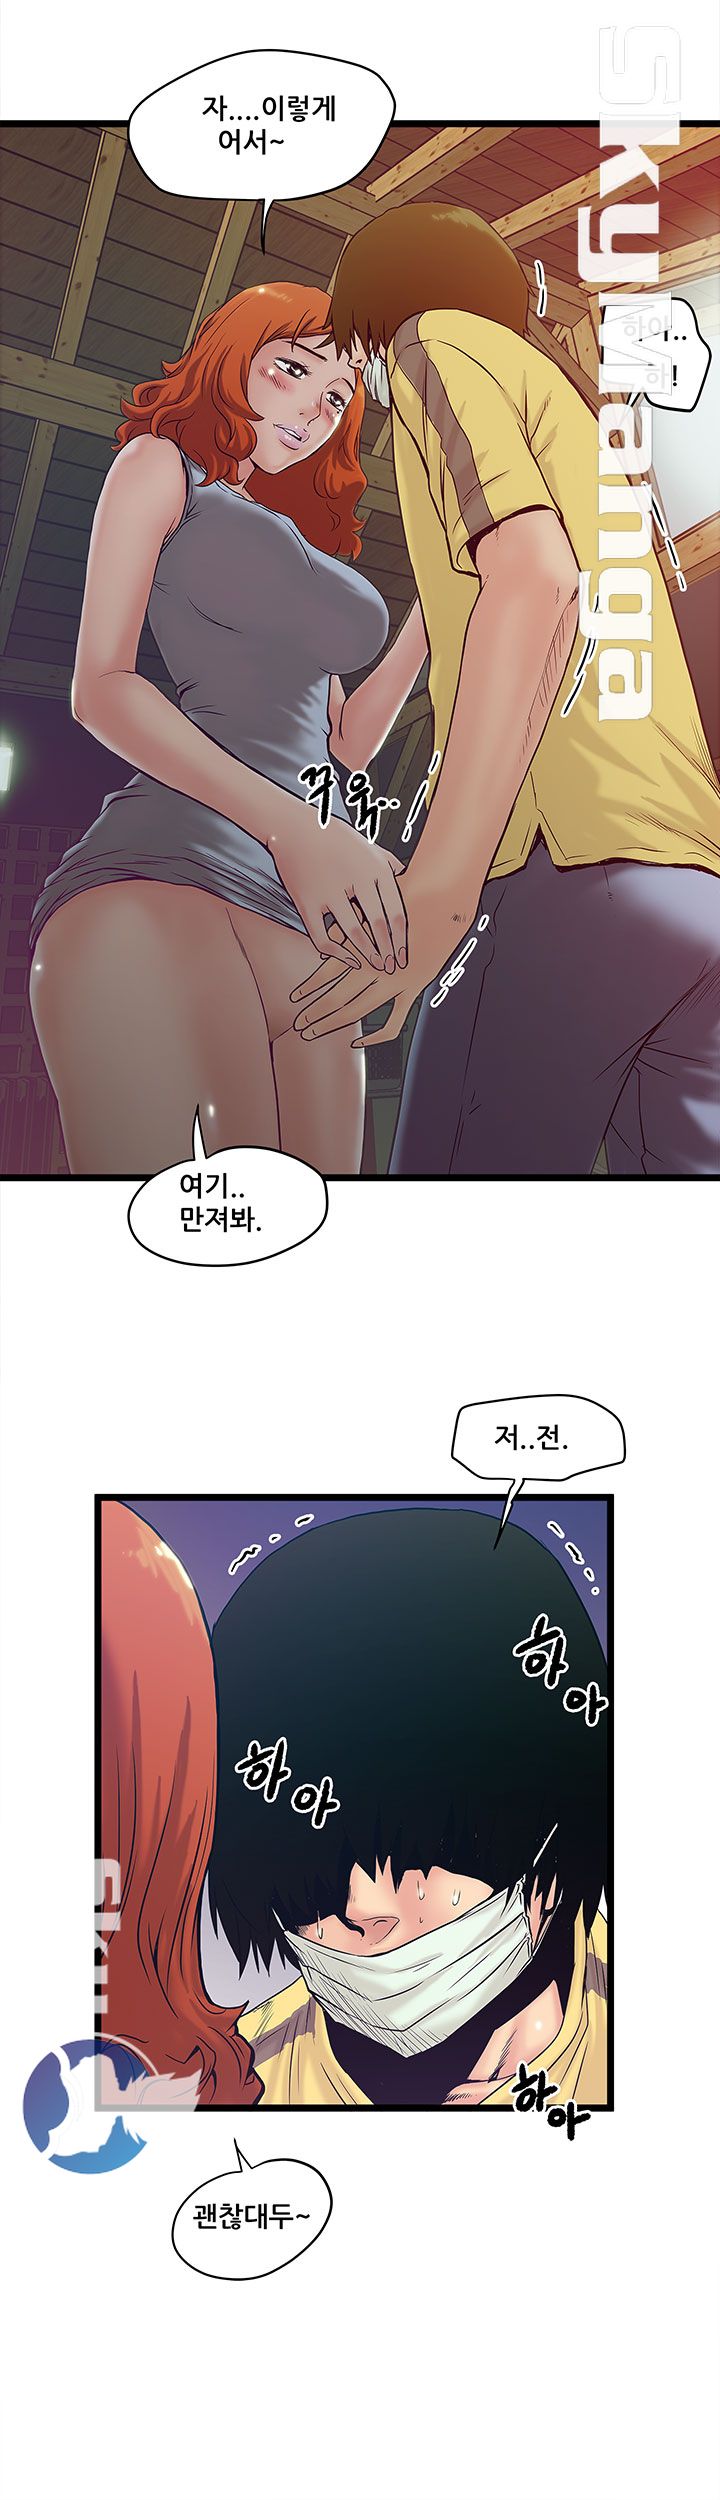 Safe House Raw - Chapter 1 Page 8